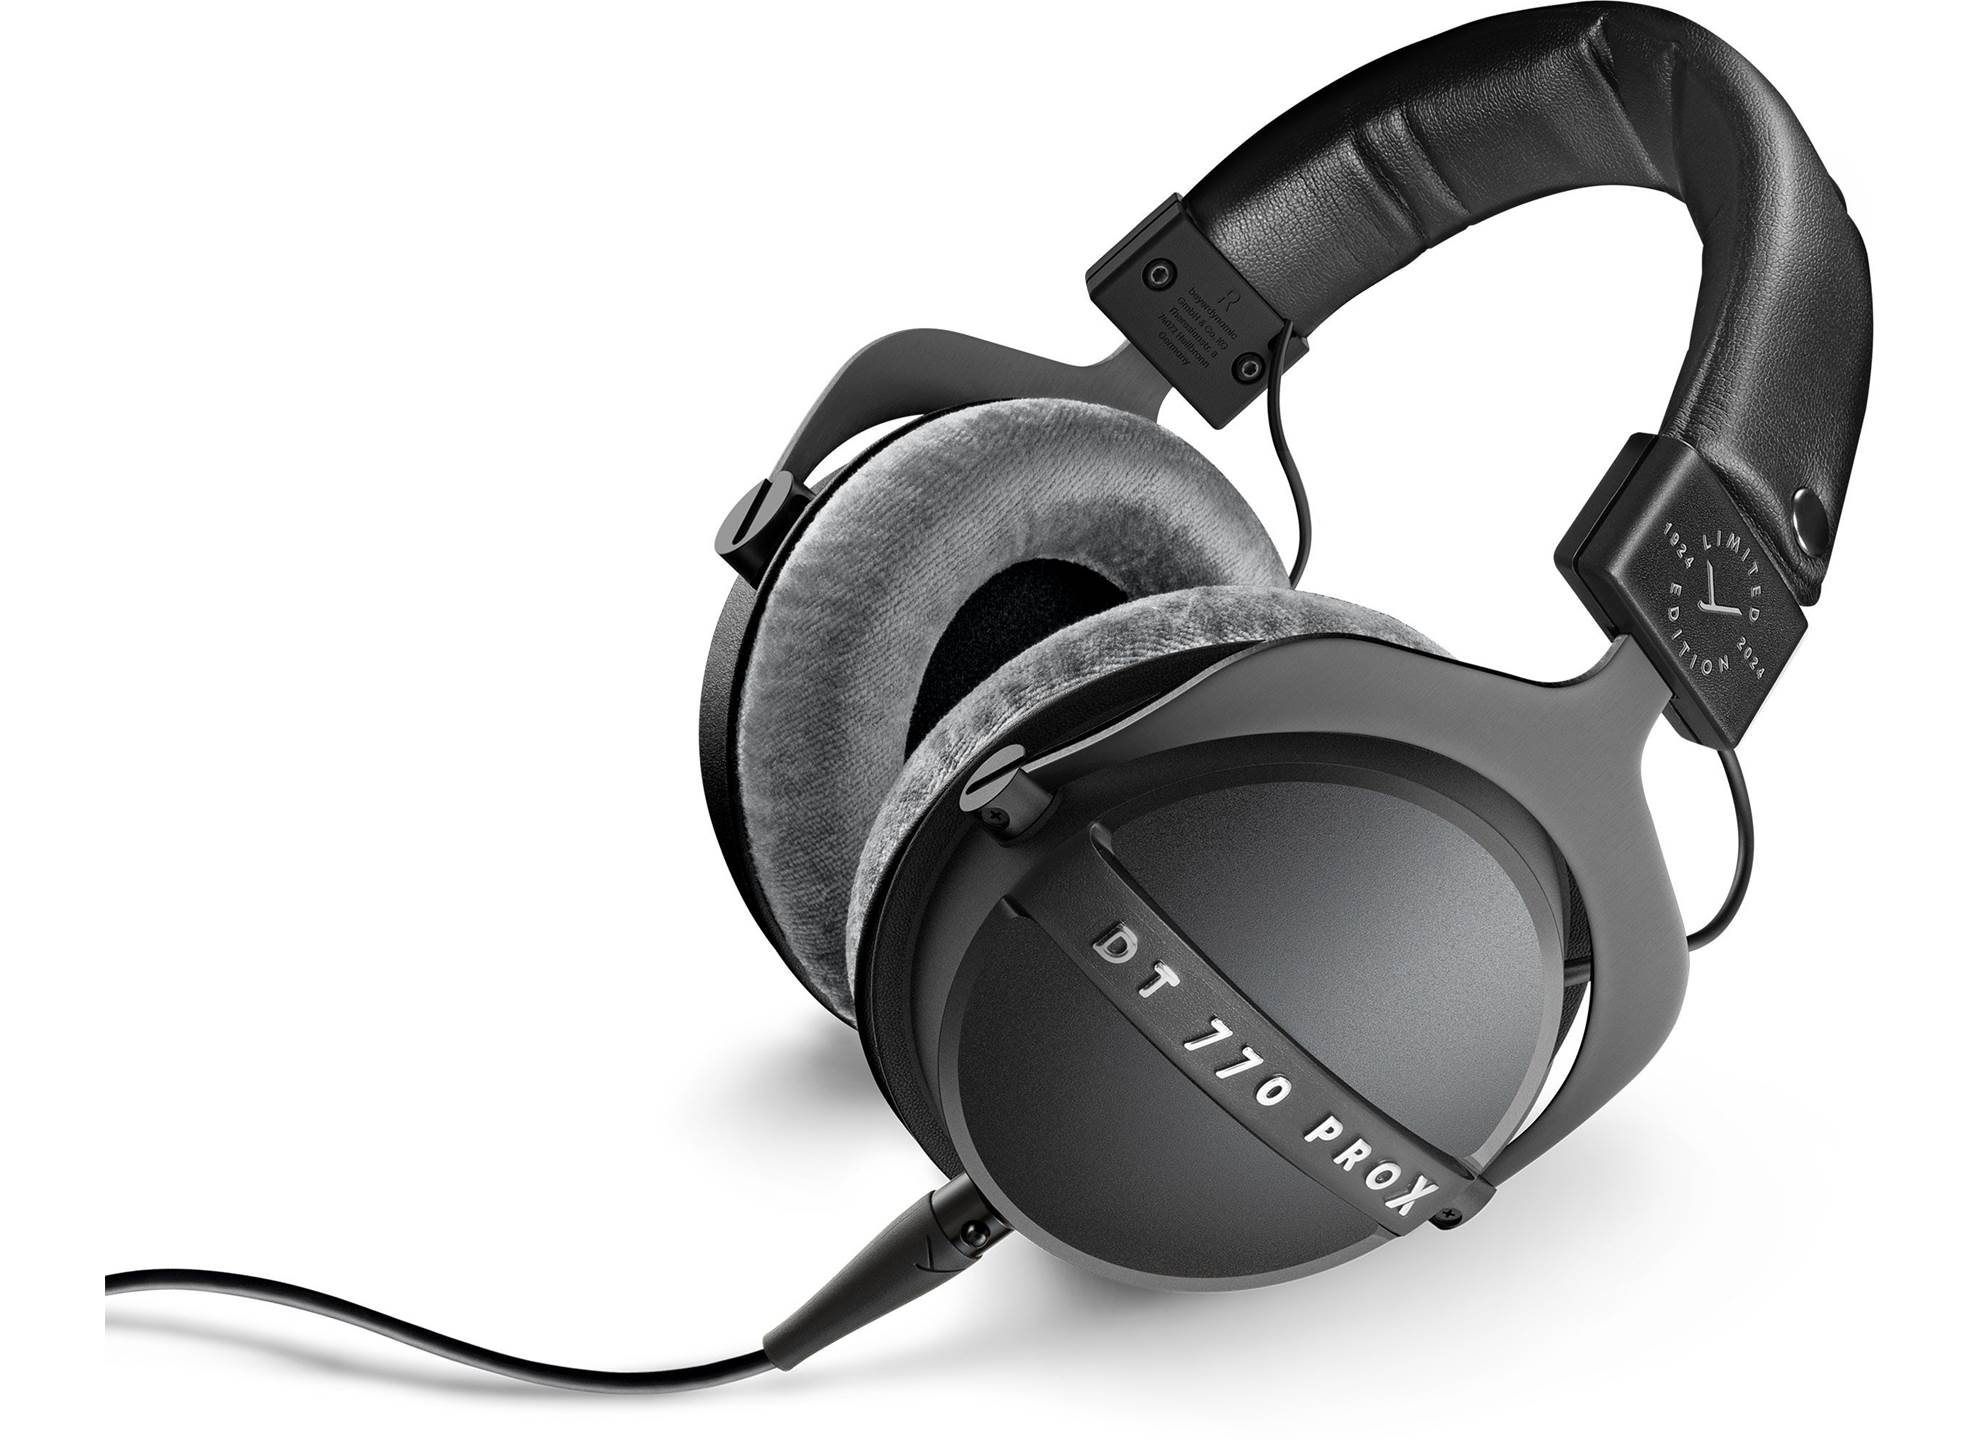 DT 770 Pro X 48 Ohm Limited Edition